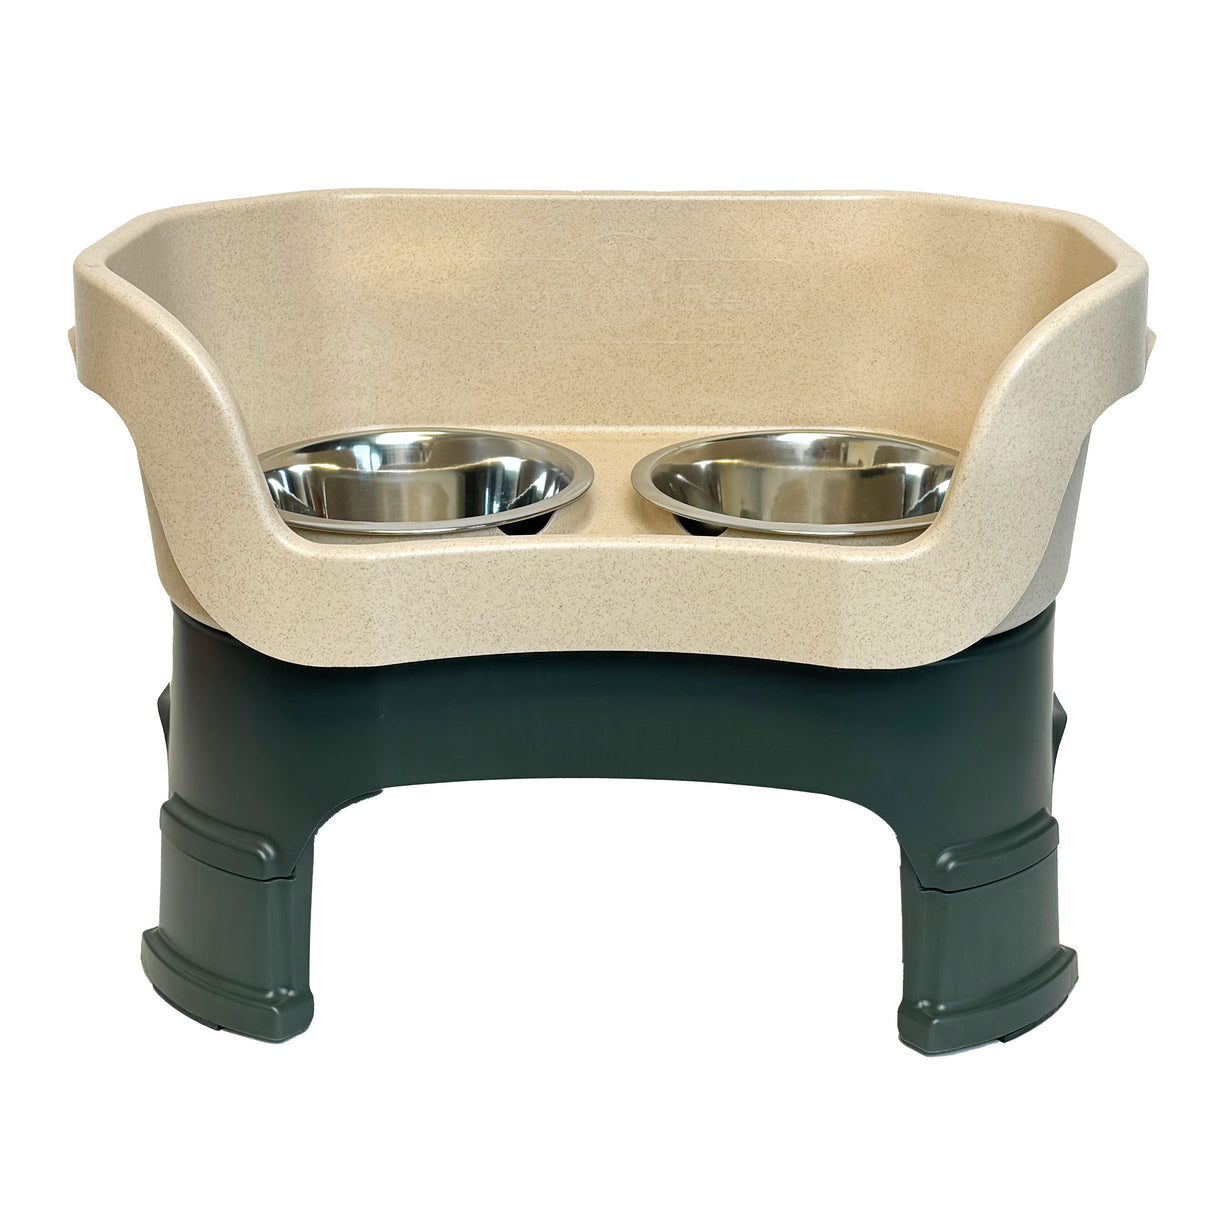 Neater Feeder with Leg Extensions Medium Size in Hunter Green and Stone